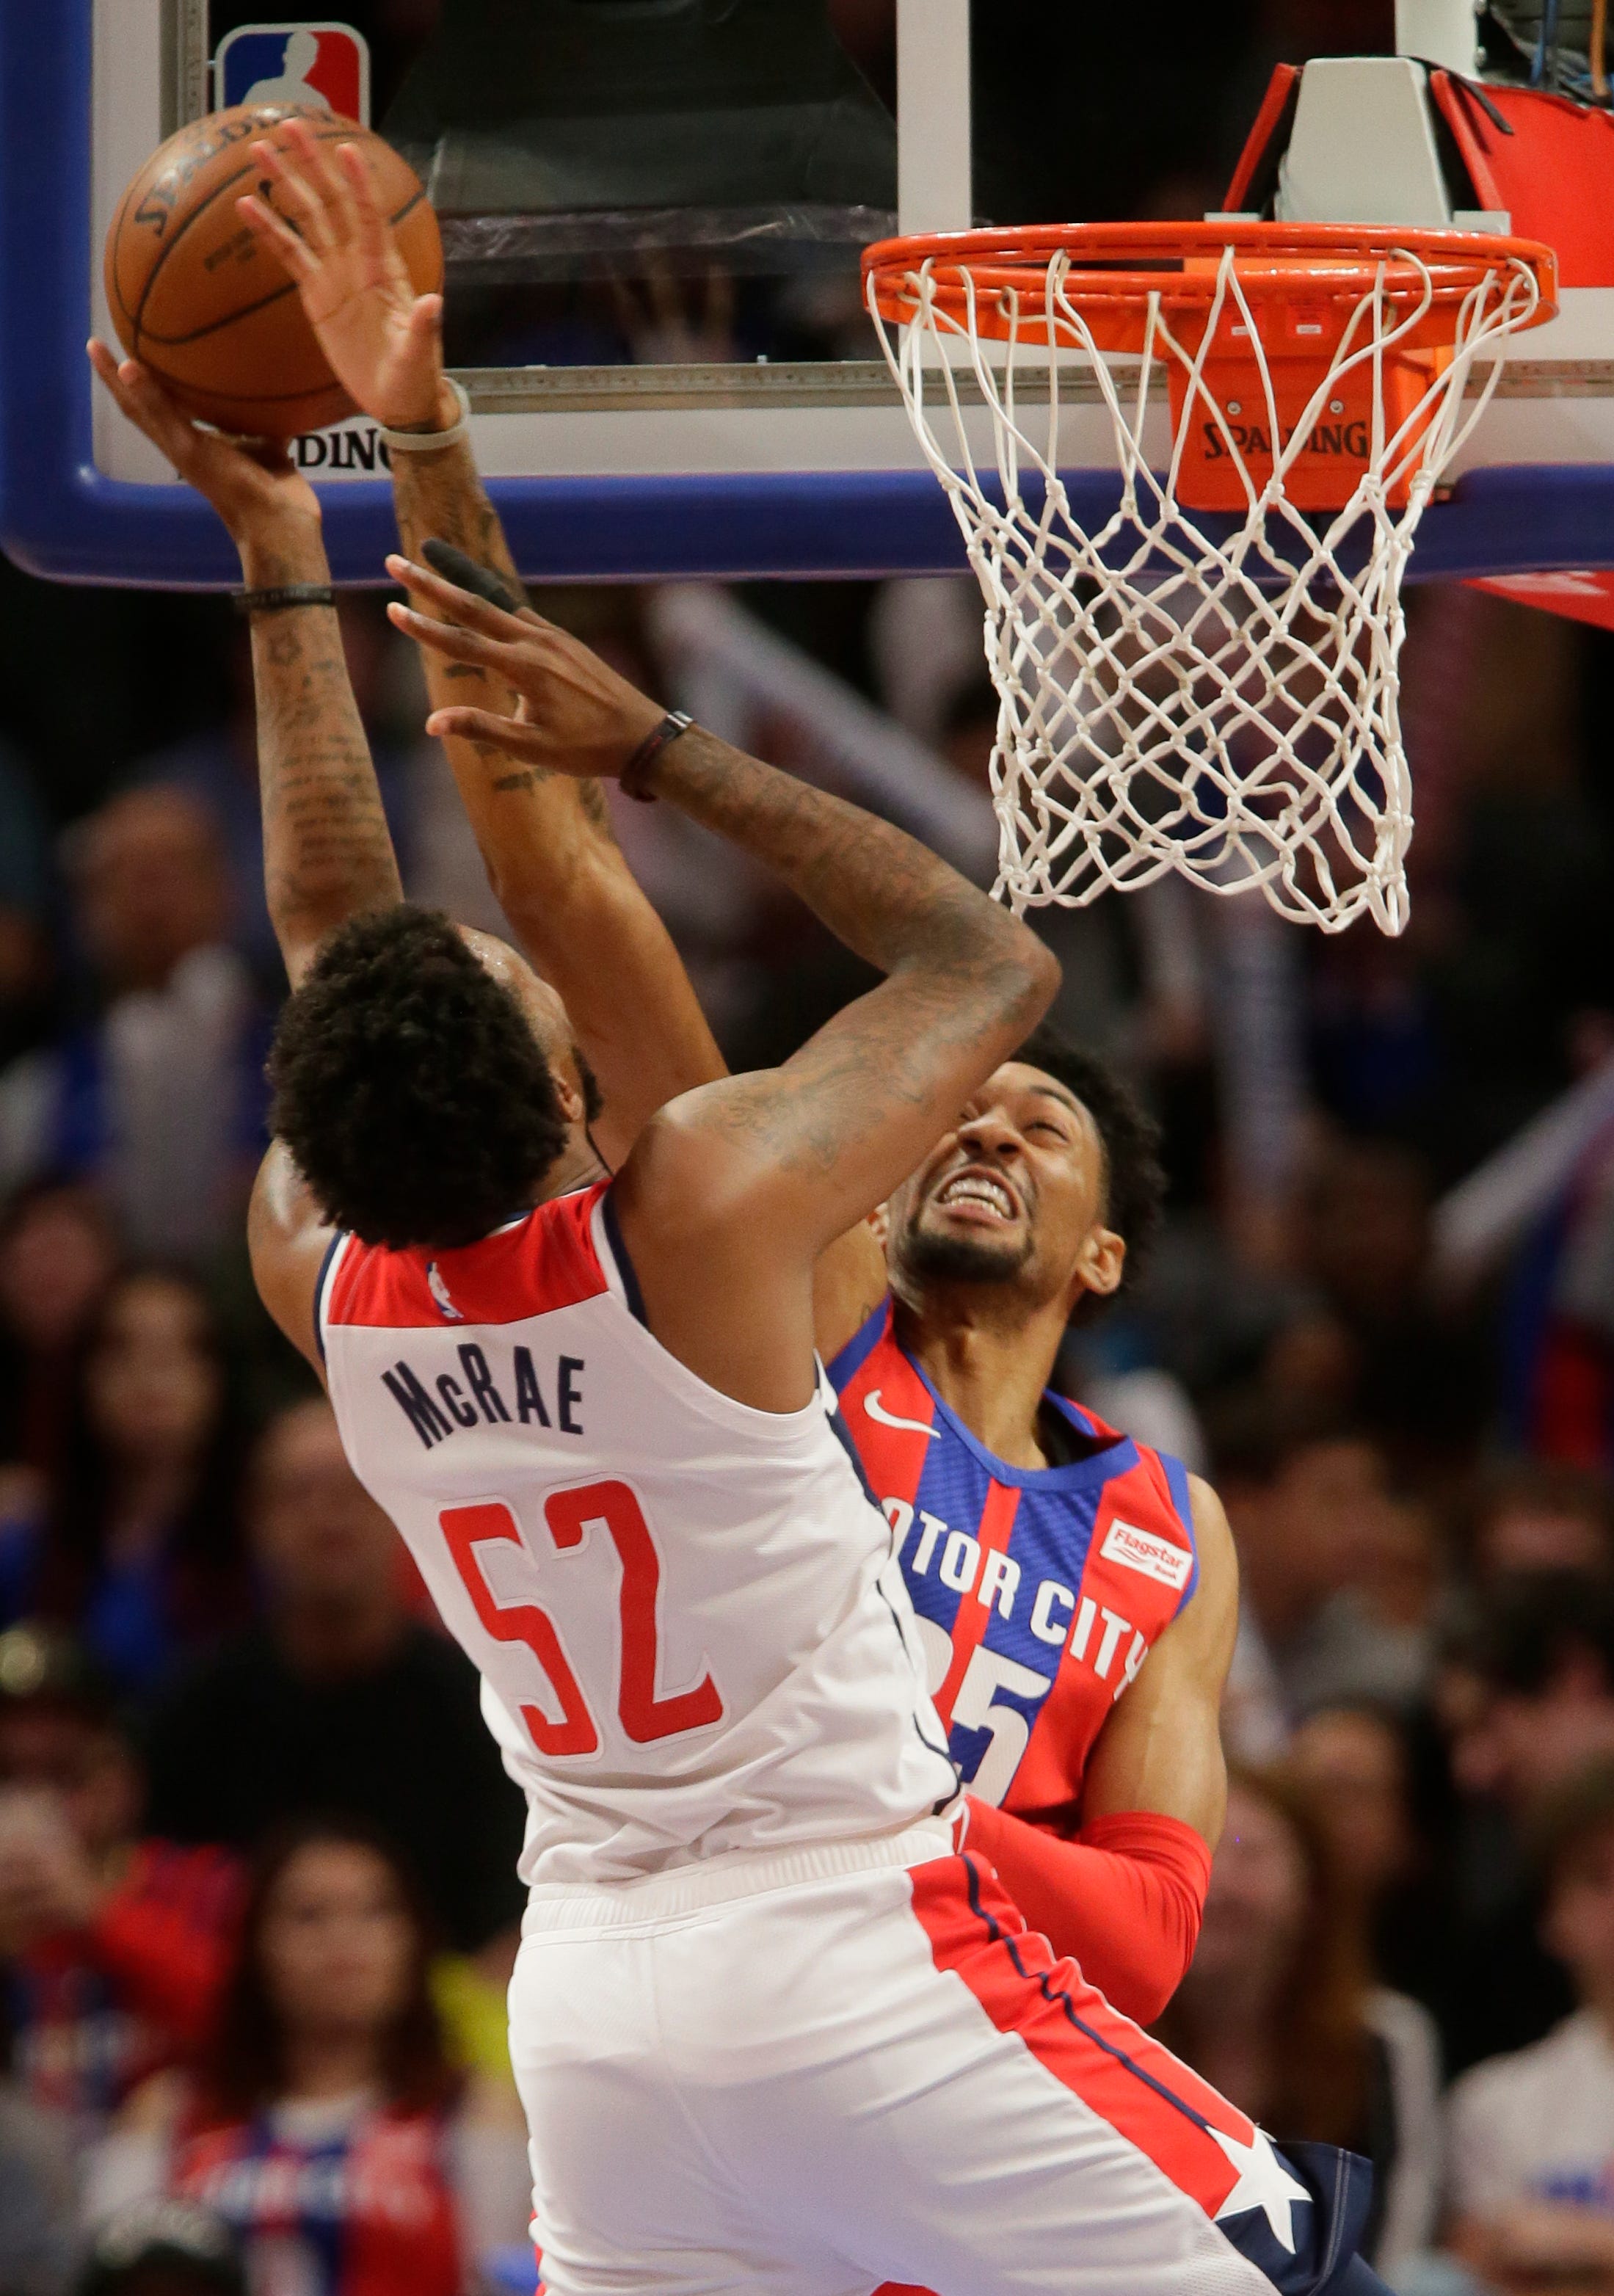 Detroit Pistons forward Christian Wood, right, defends against a shot by Washington Wizards guard Jordan McRae (52) during the first half.